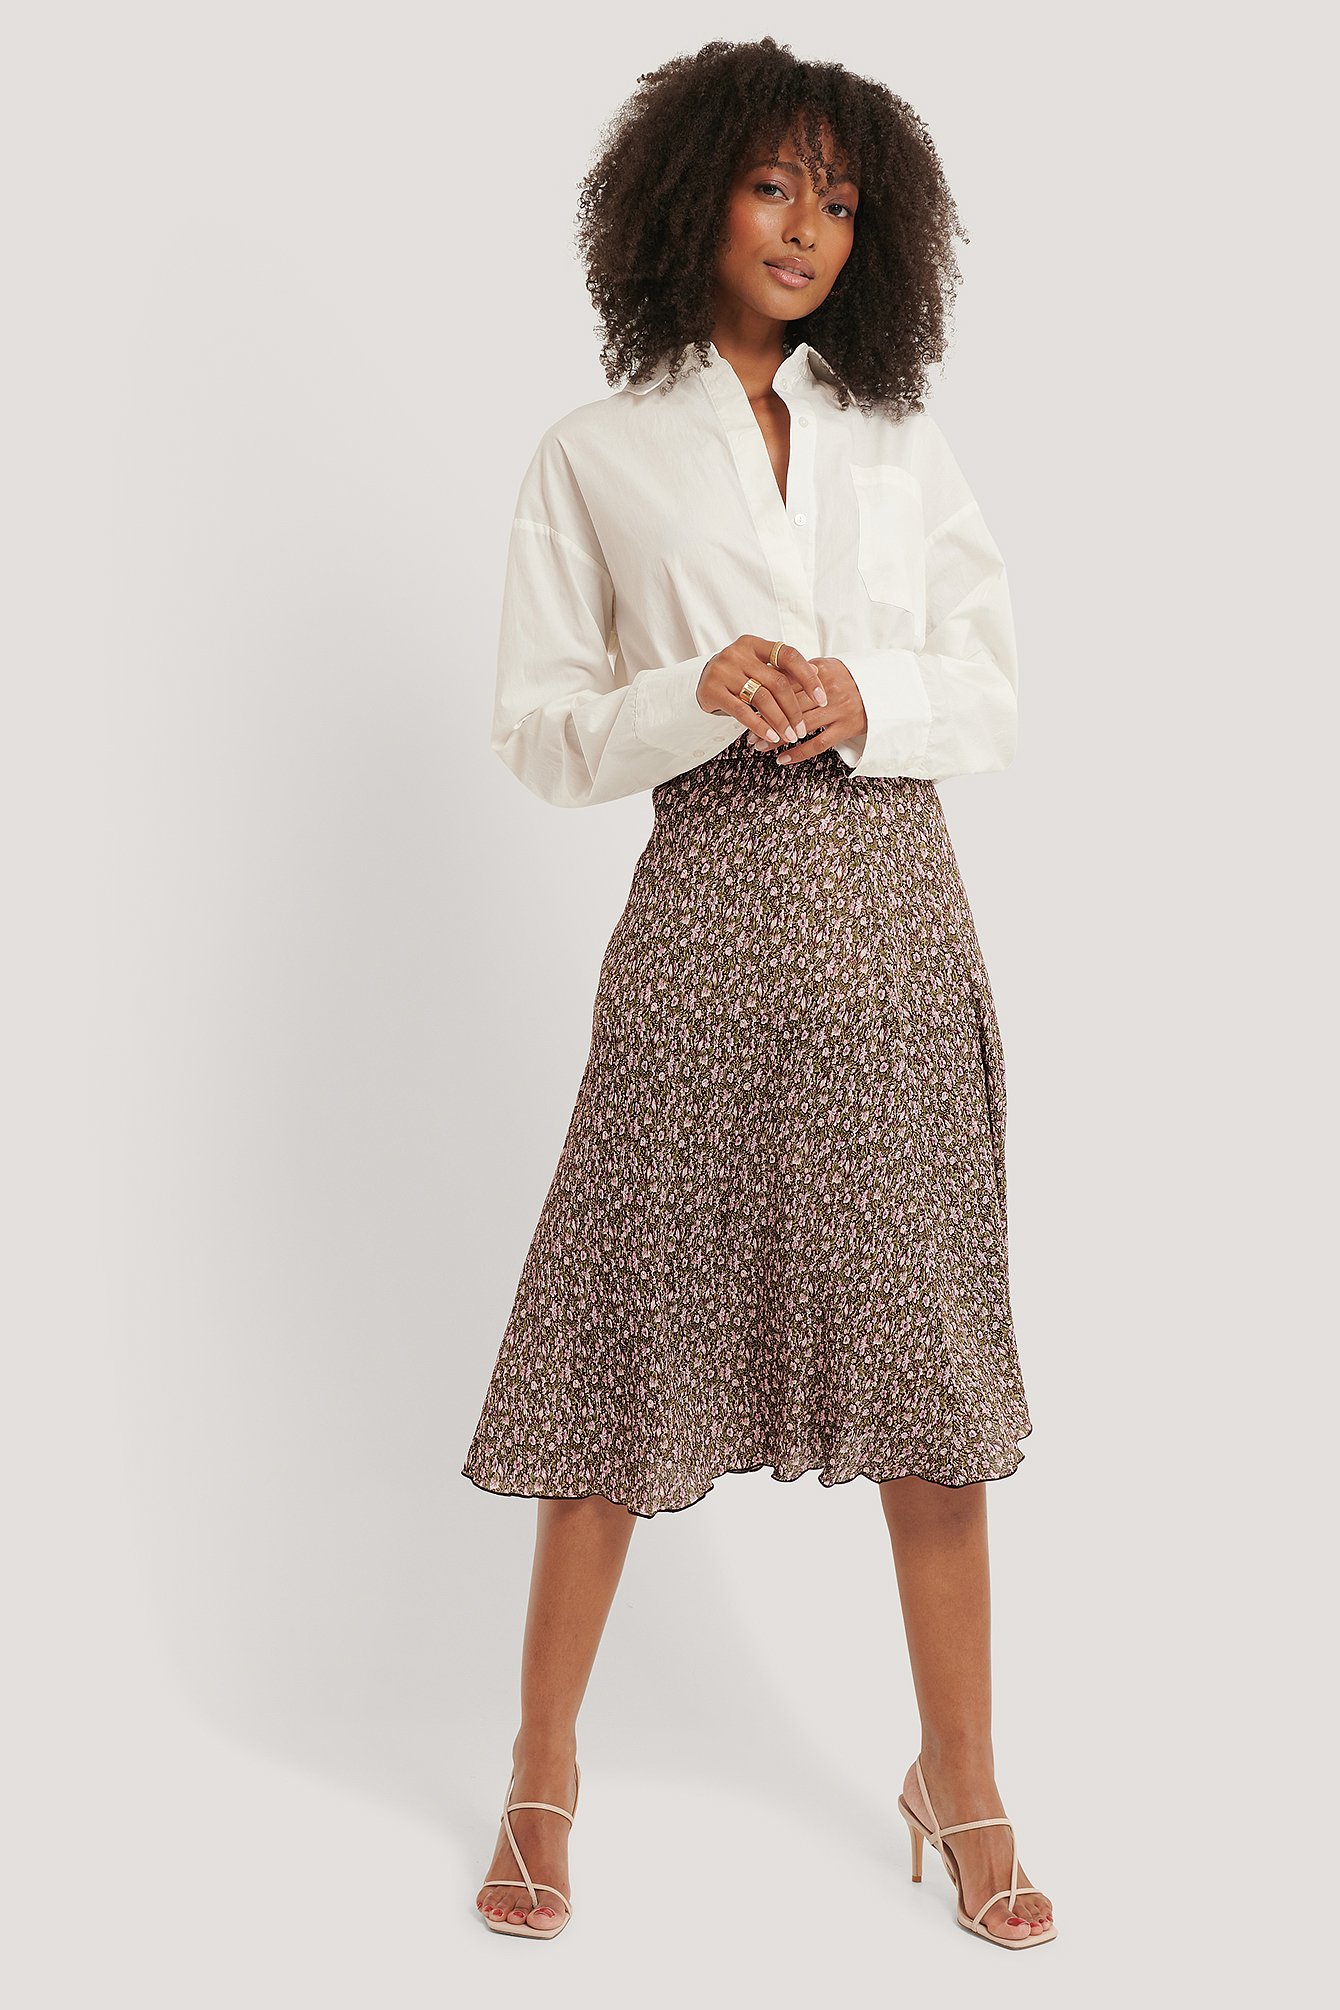 Flower Printed Skirt Outfit